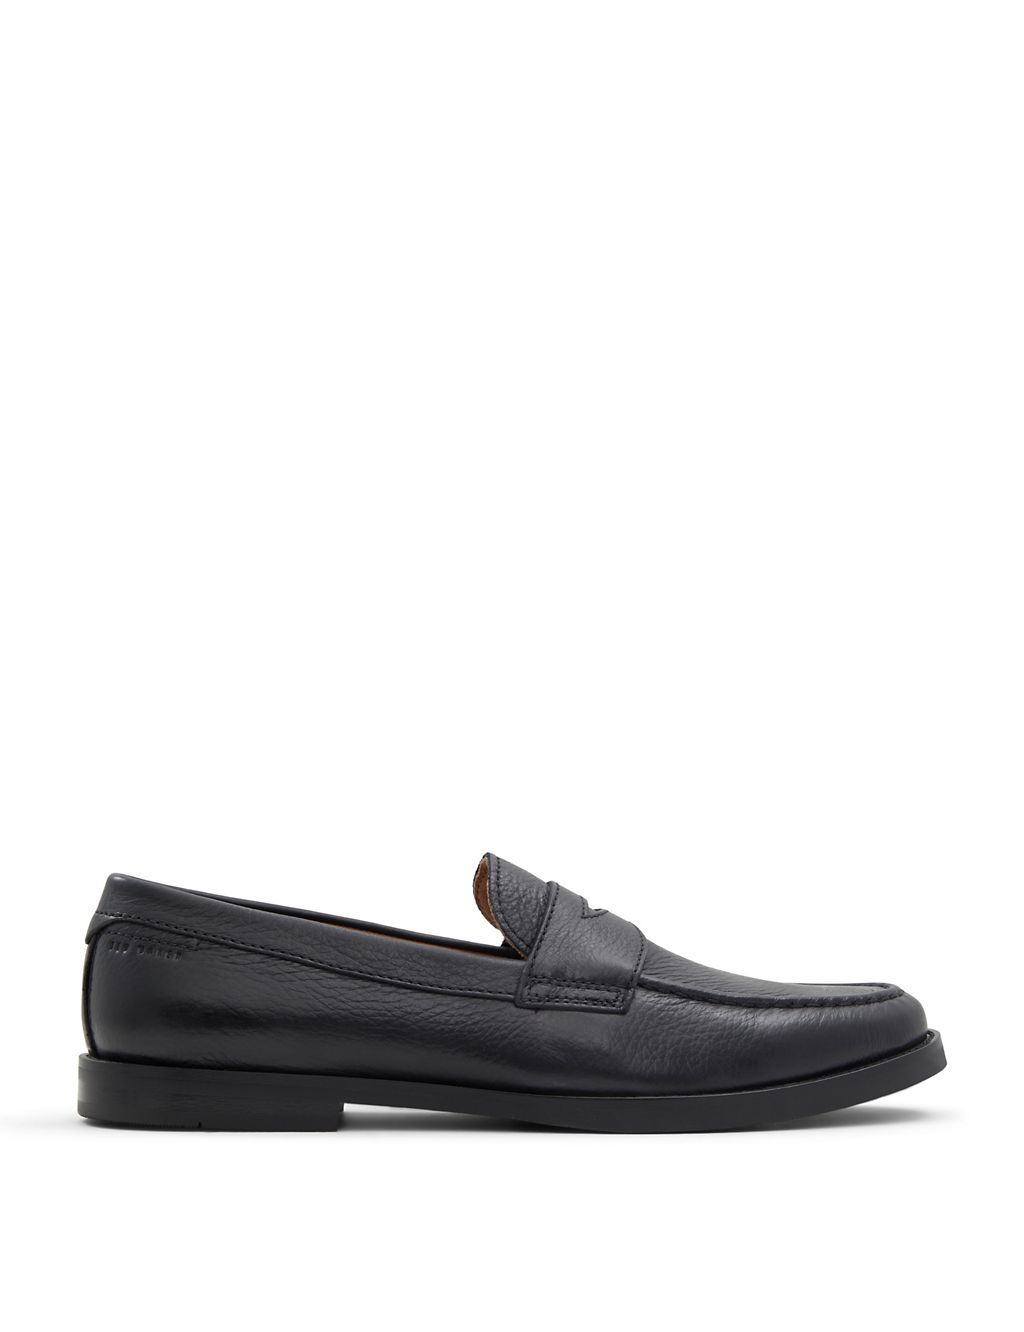 Leather Loafers 1 of 1